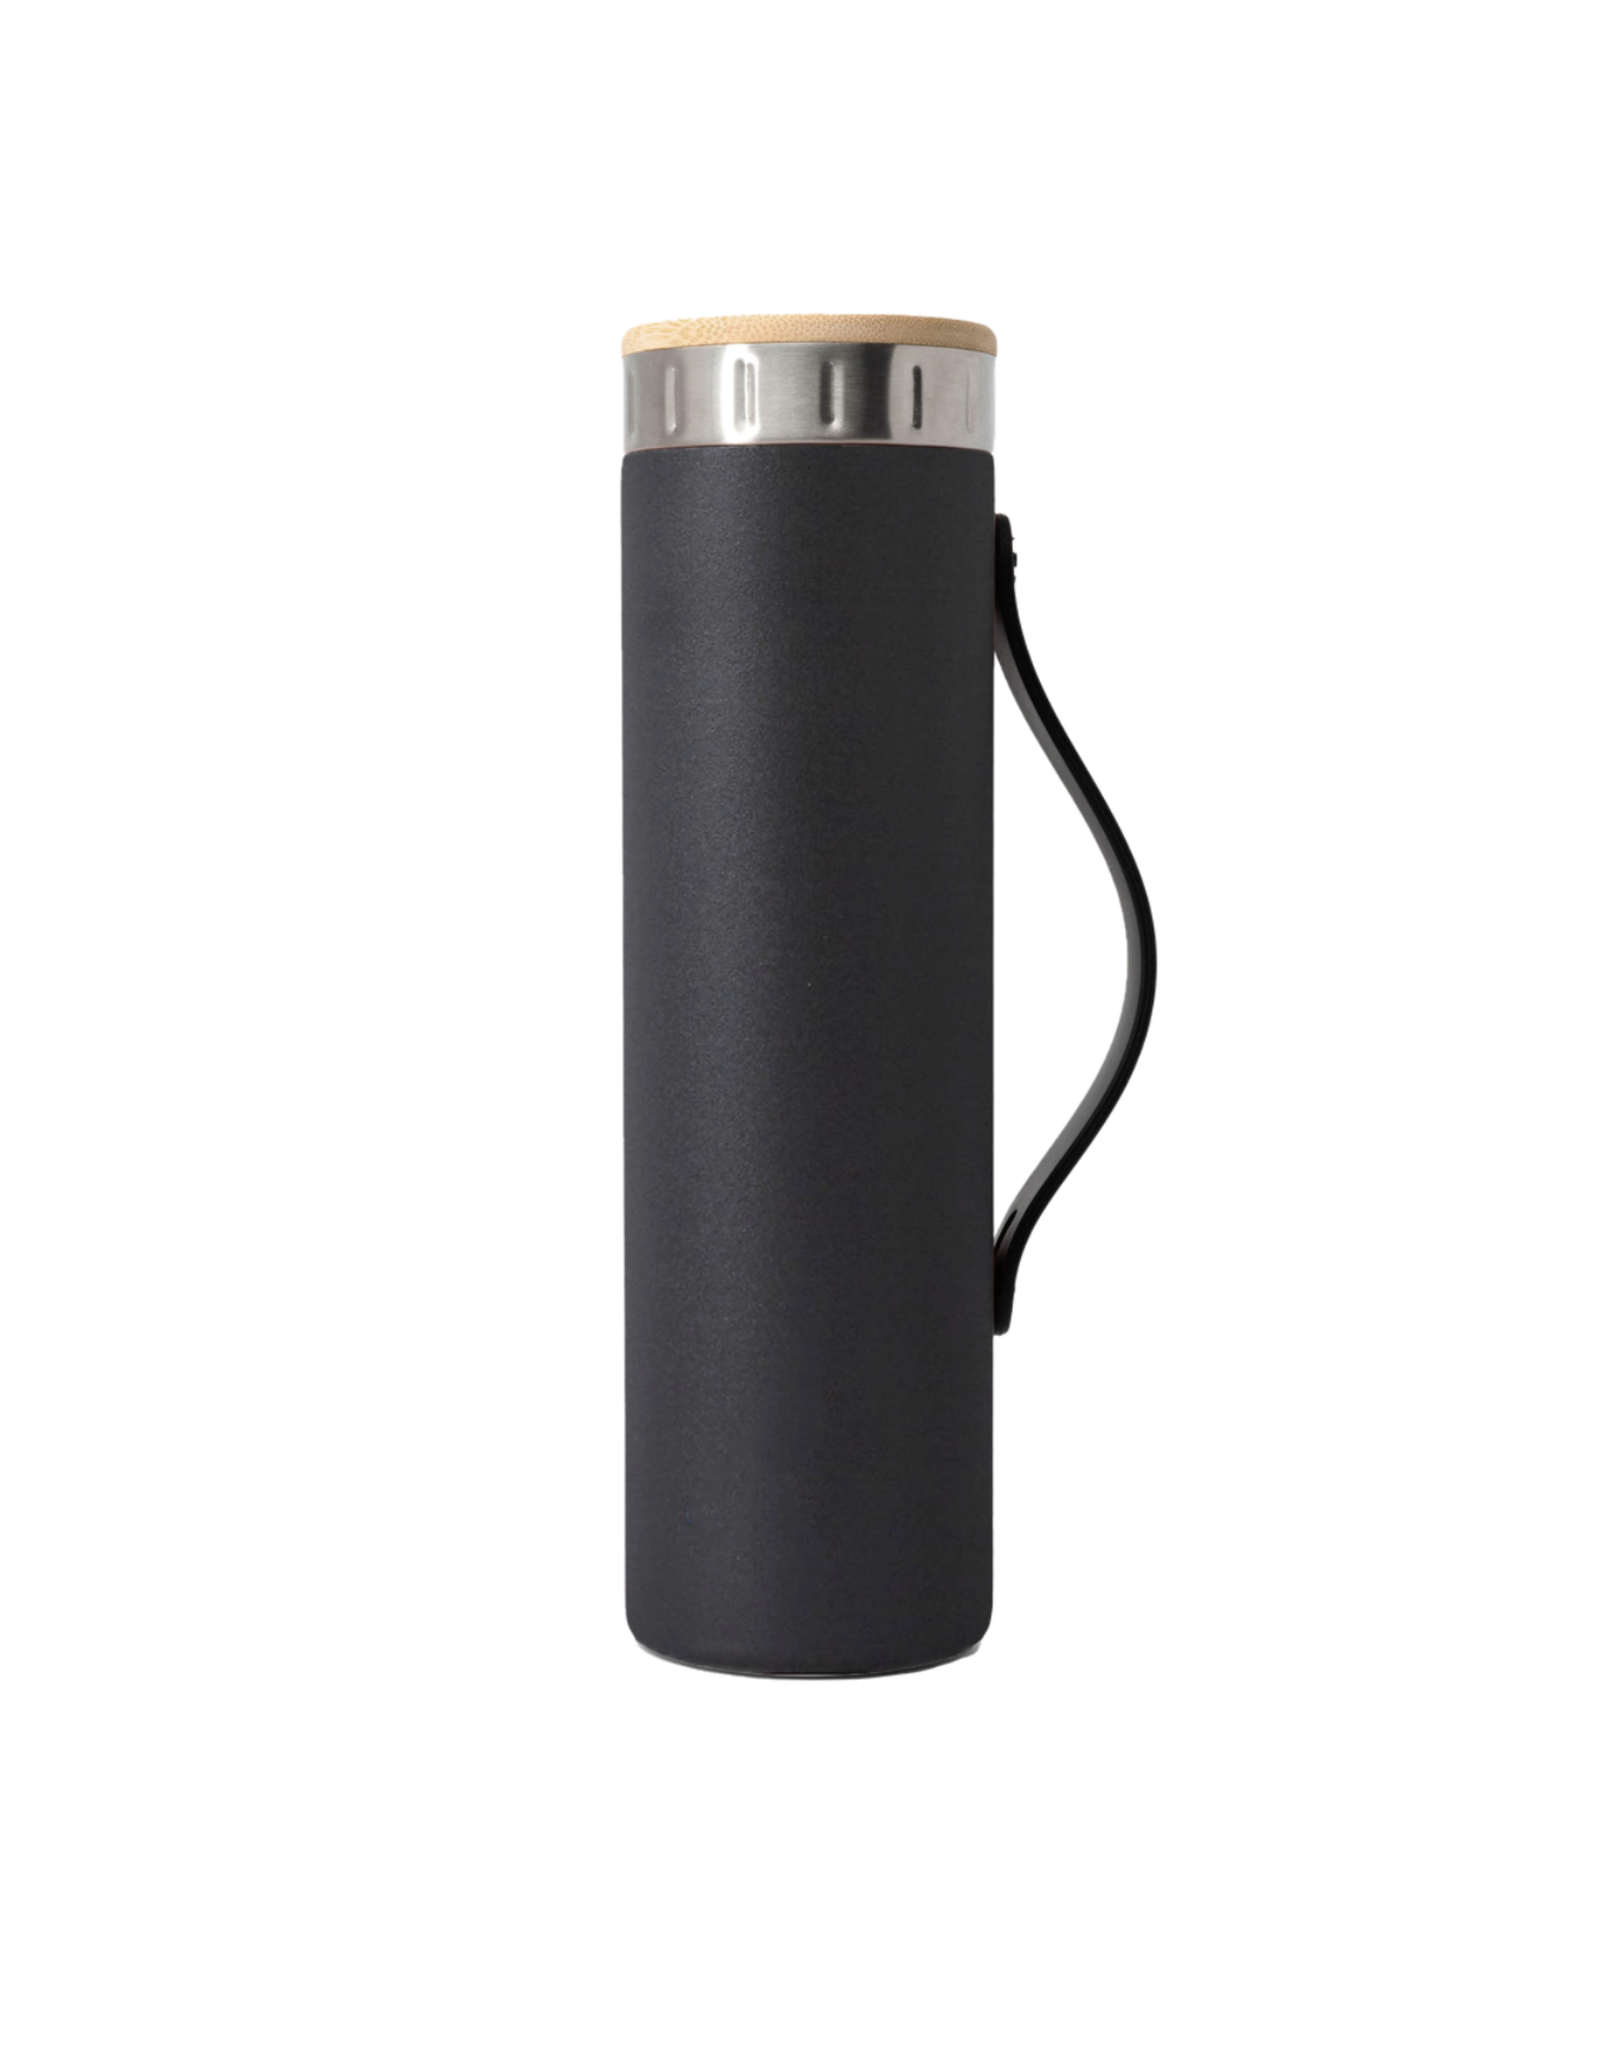 Iconic Matte Black Water Bottle with Strap - 20 oz